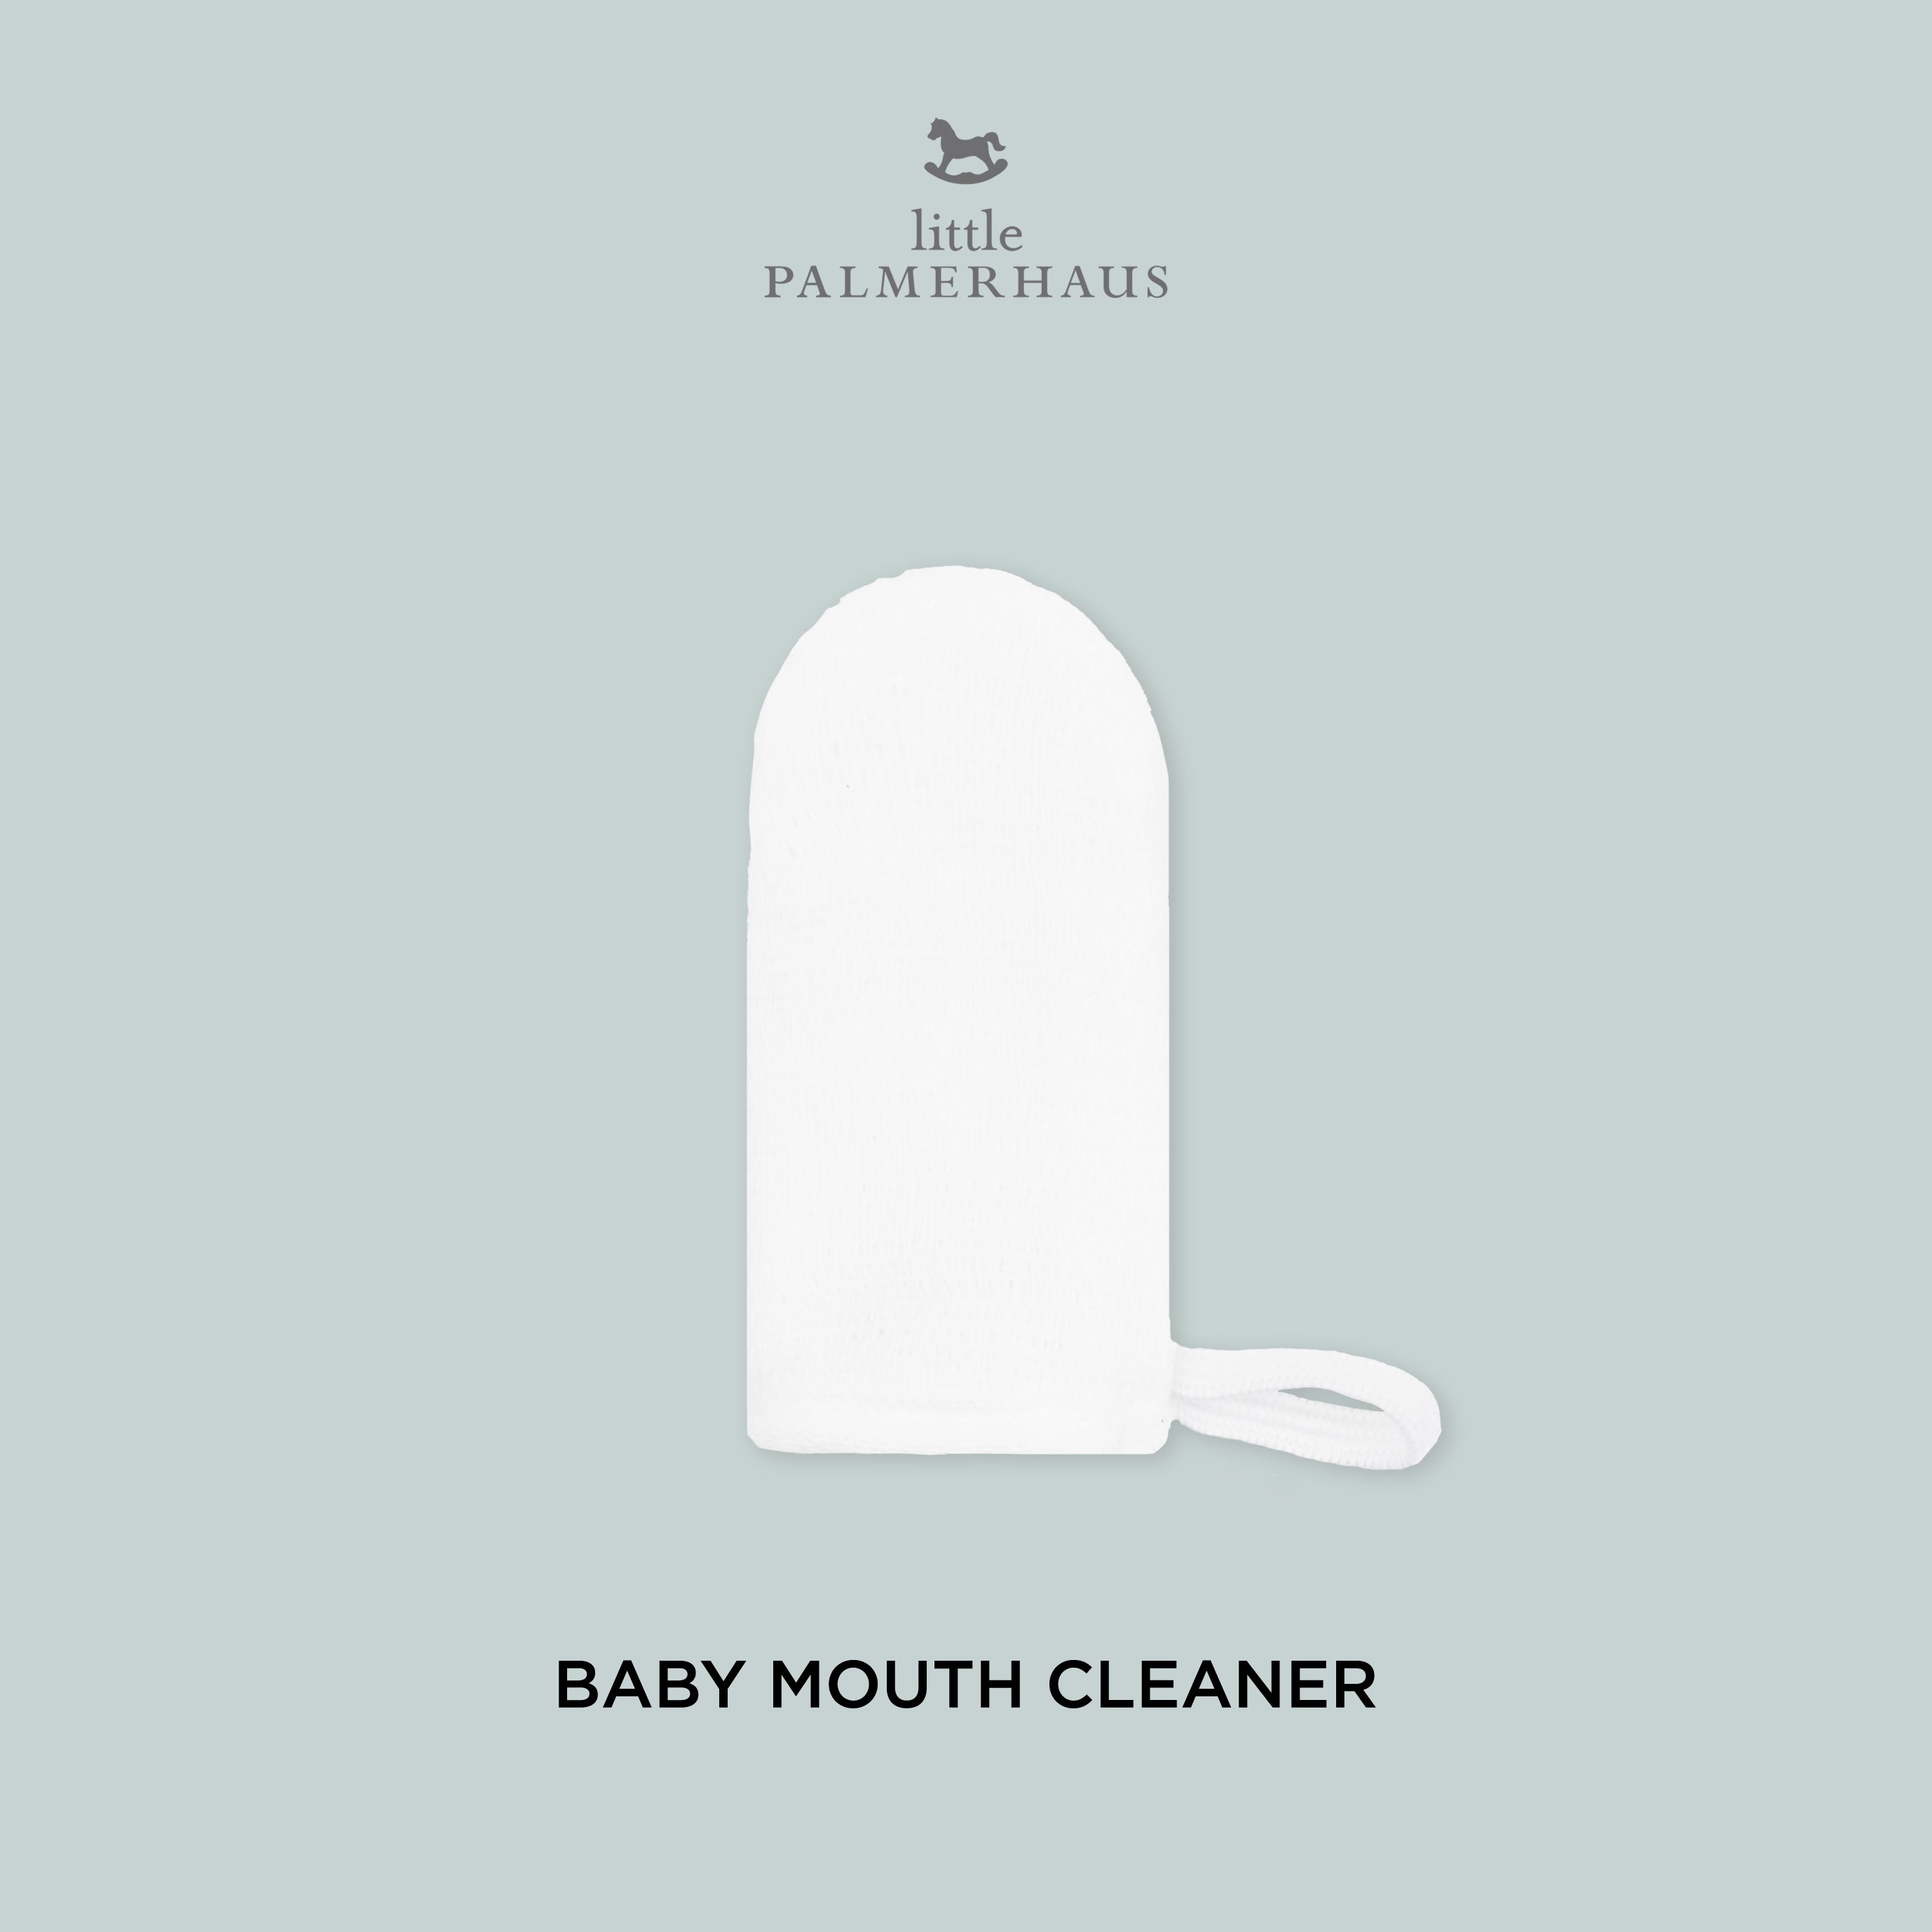 Baby Mouth Cleaner 2.0